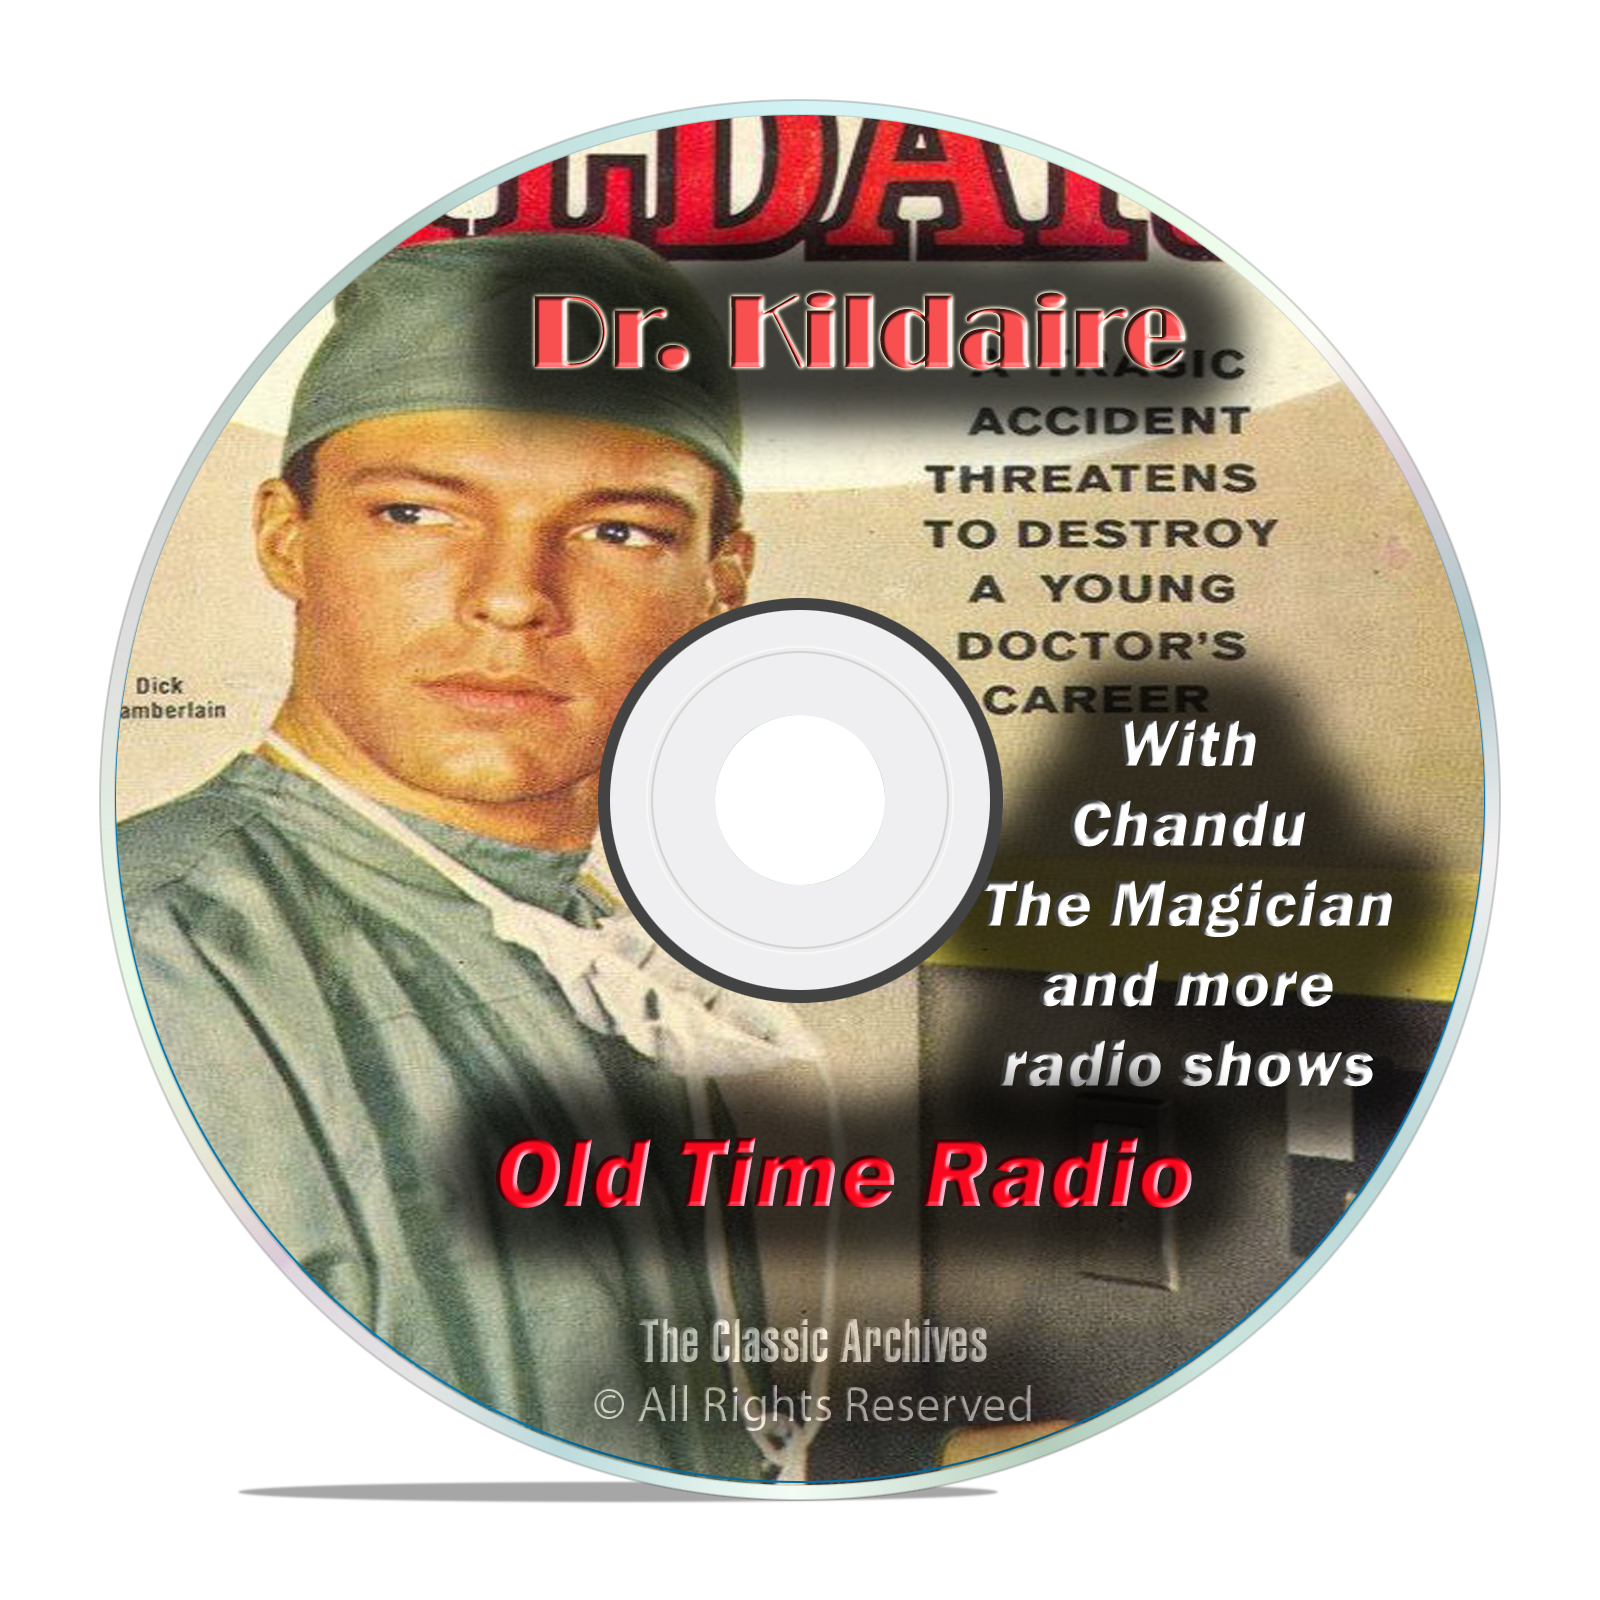 Dr. Kildaire, 1,023 Classic Old Time Radio Medical Drama Shows, OTR mp3 DVD